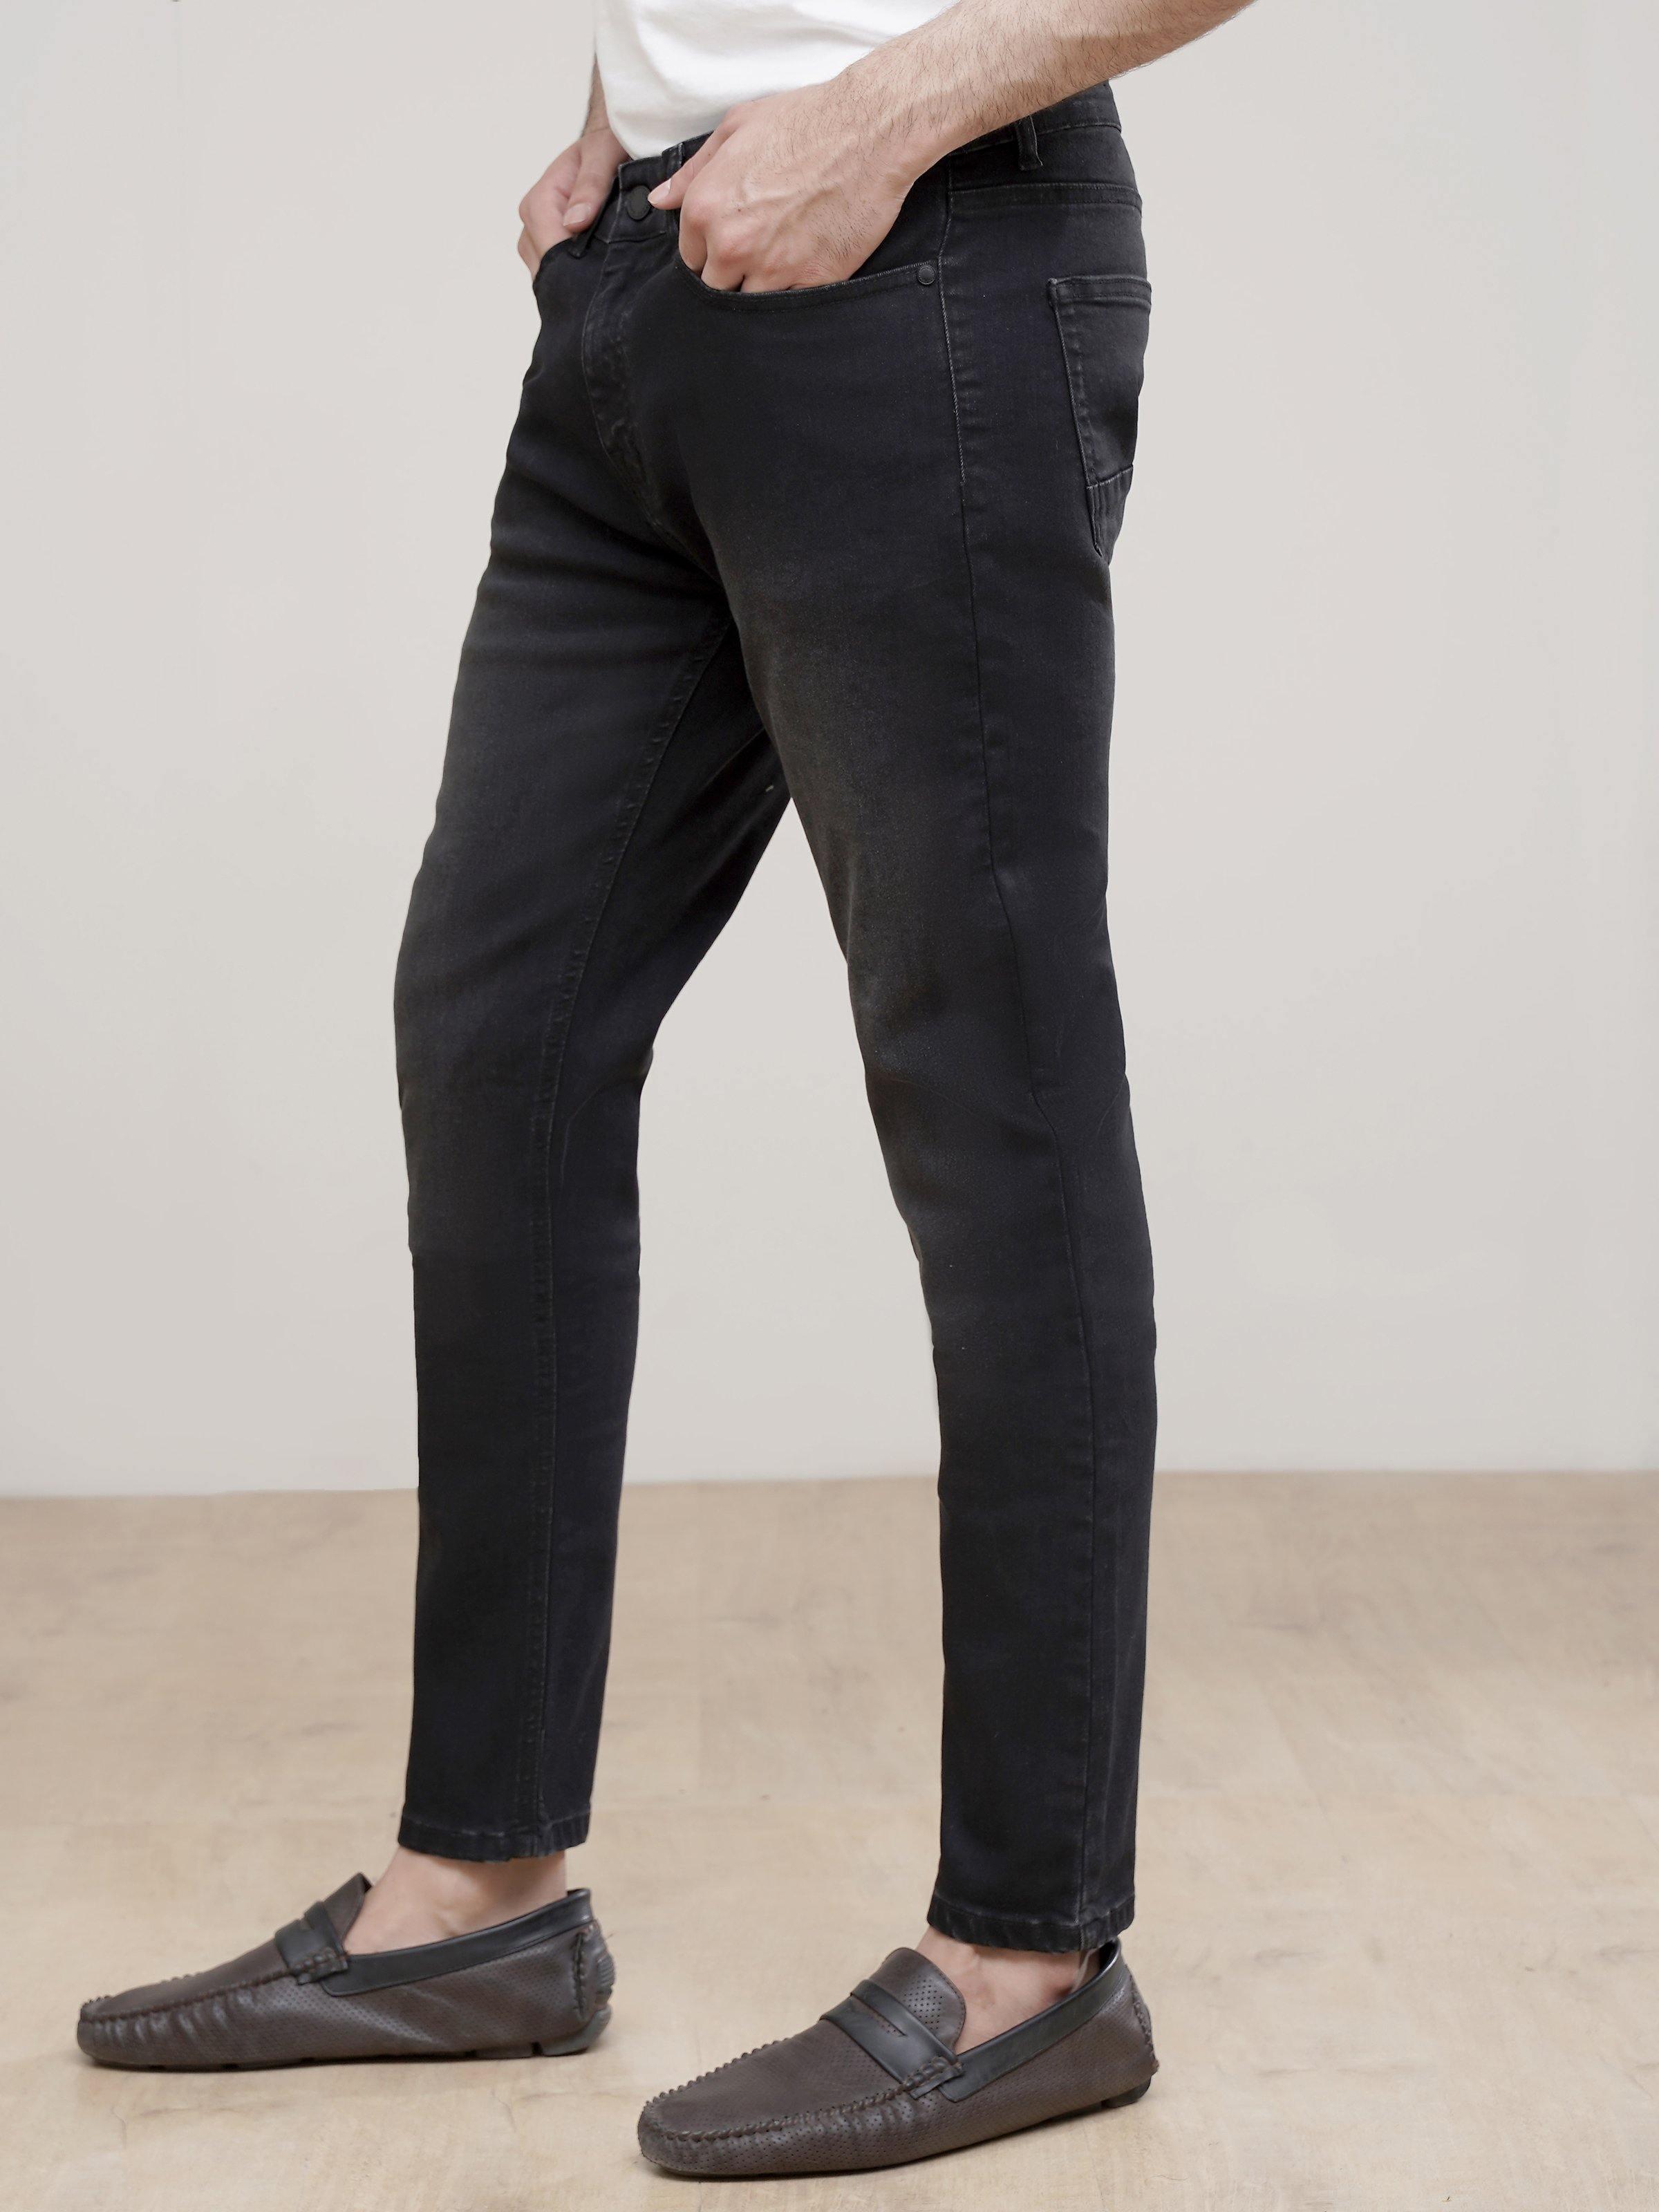 JEANS CHARCOAL at Charcoal Clothing